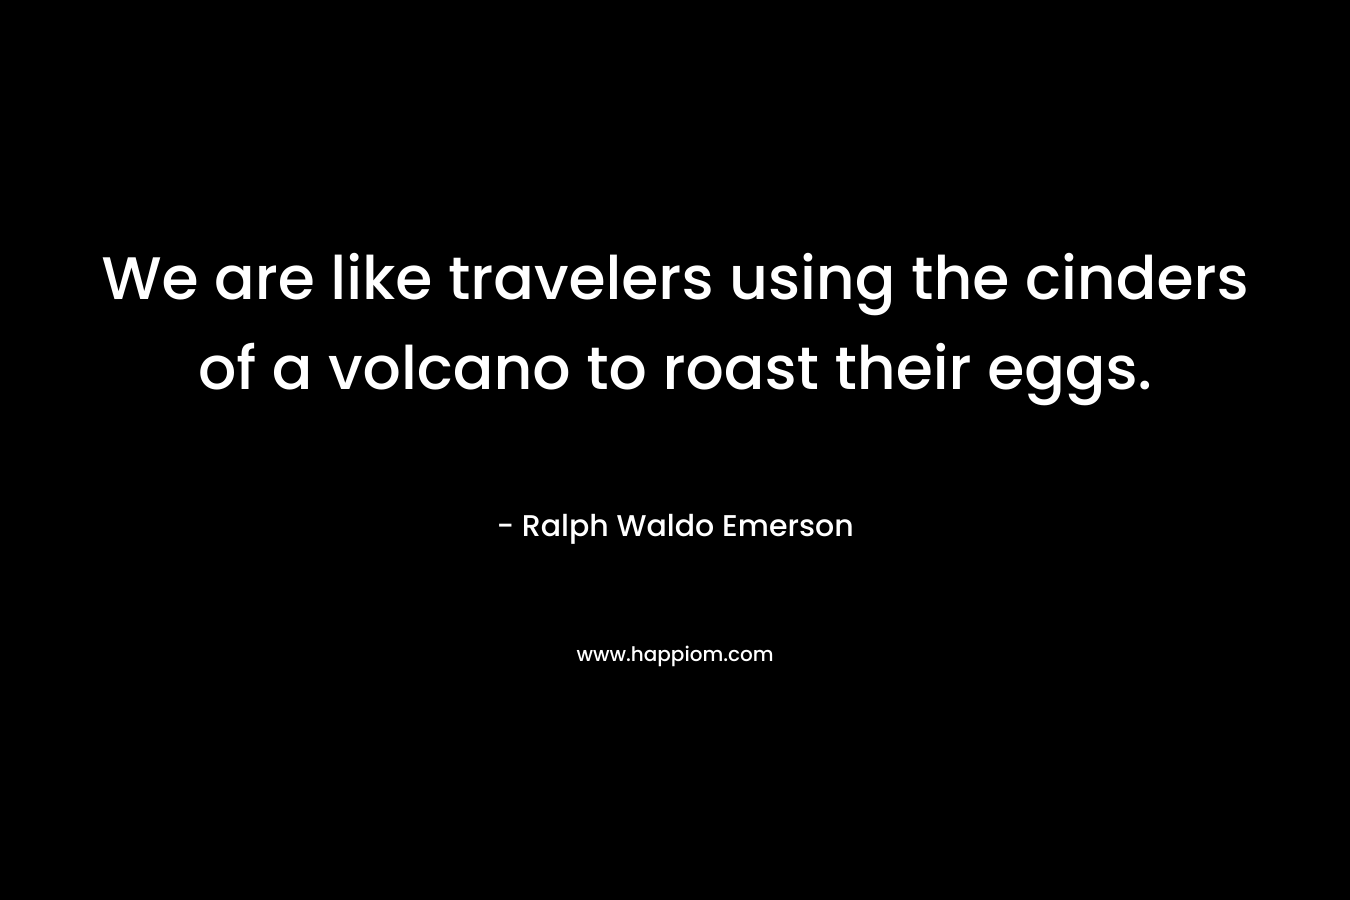 We are like travelers using the cinders of a volcano to roast their eggs. – Ralph Waldo Emerson